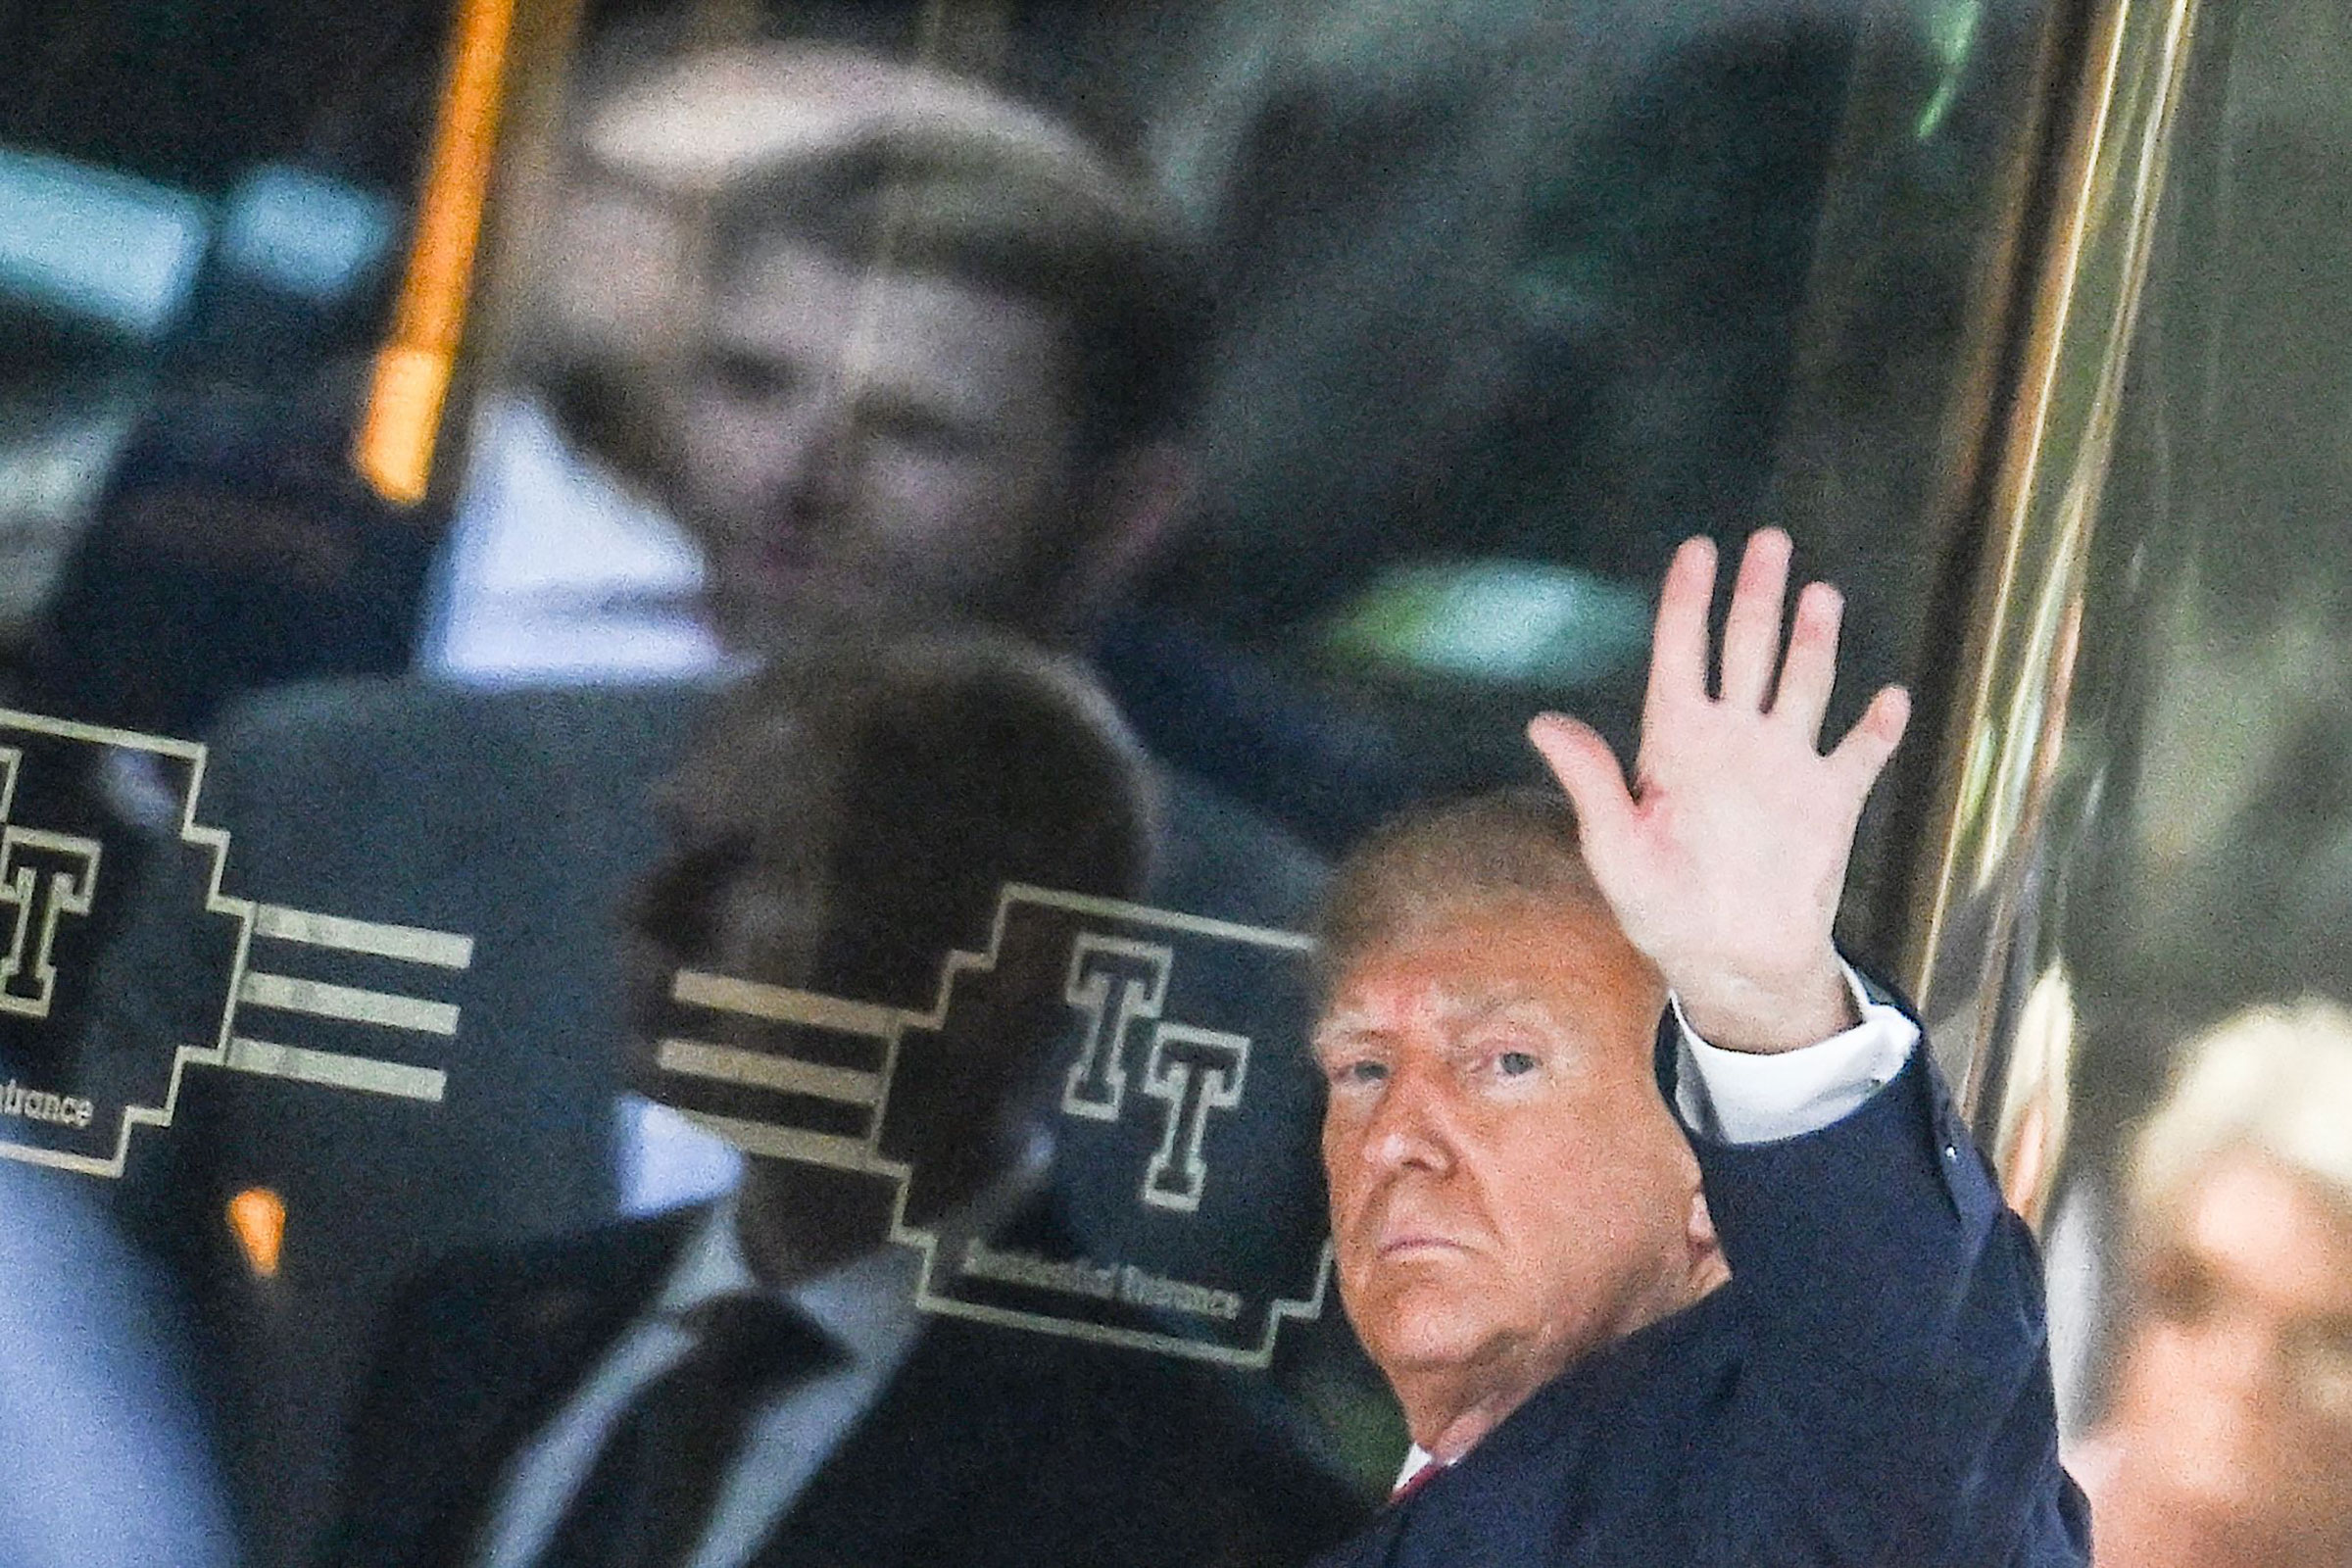 Former president Donald Trump arrives at Trump Tower in New York on April 3, 2023. (Andrew Caballero-Reynolds—AFP/Getty Images)